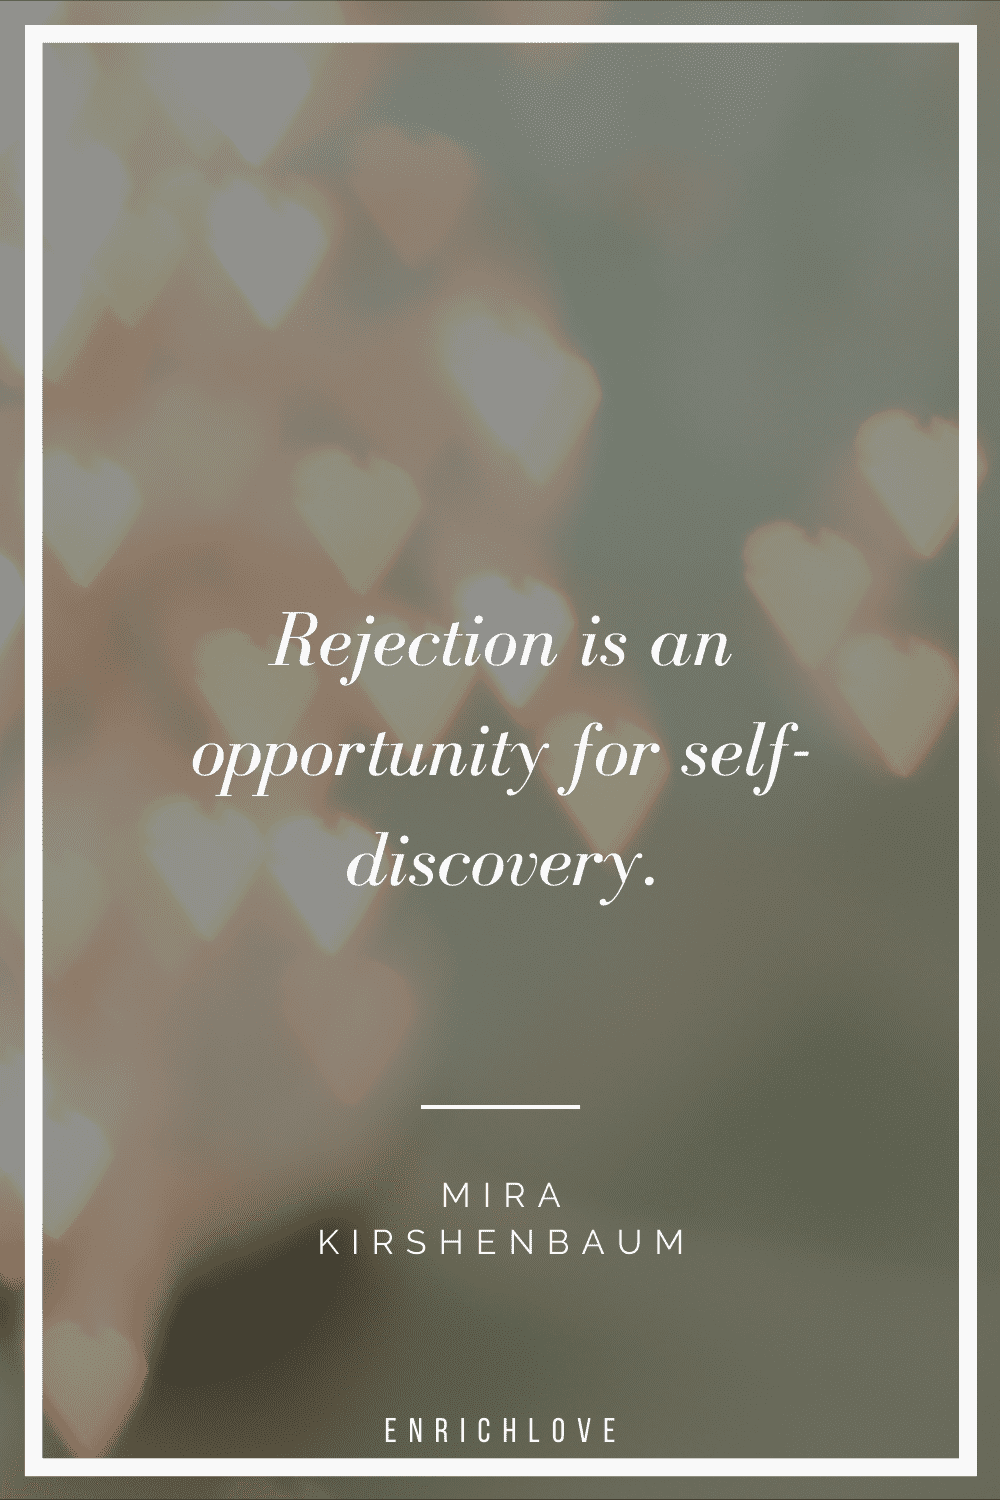 Rejection is an opportunity for self-discovery.